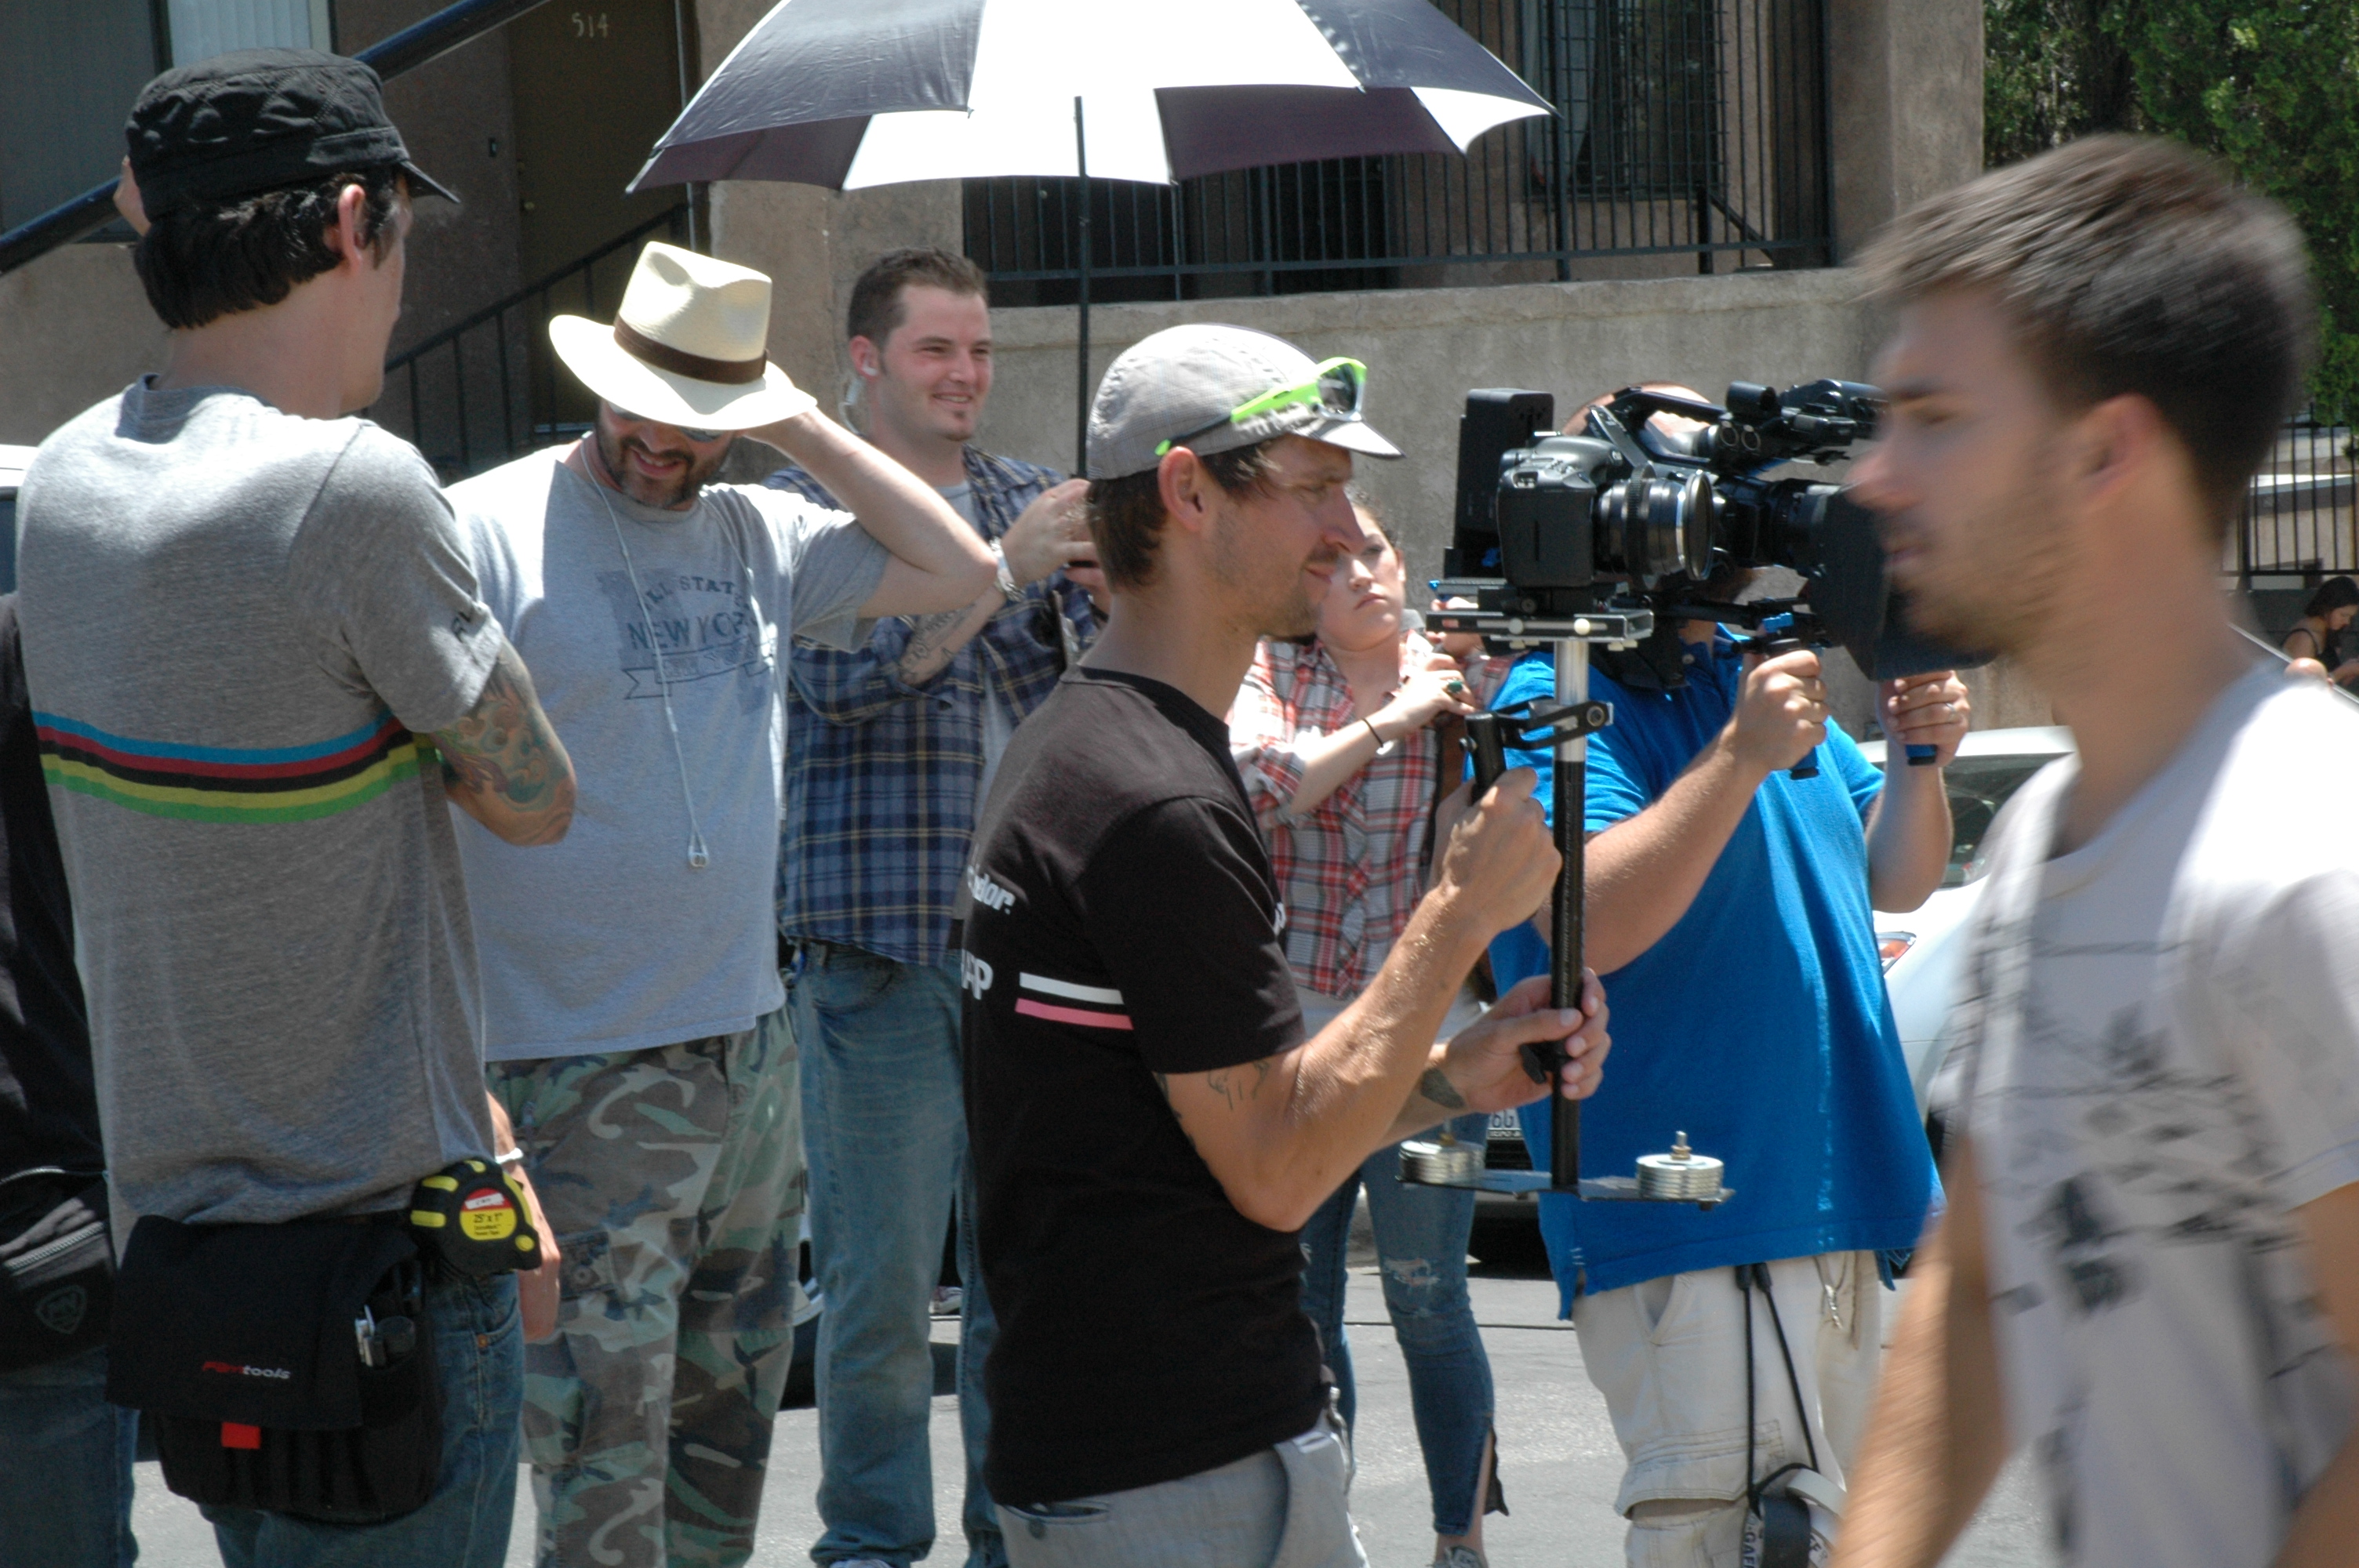 director David Llauger Meiselman with cinematographer and crew on set on Strike One 2011